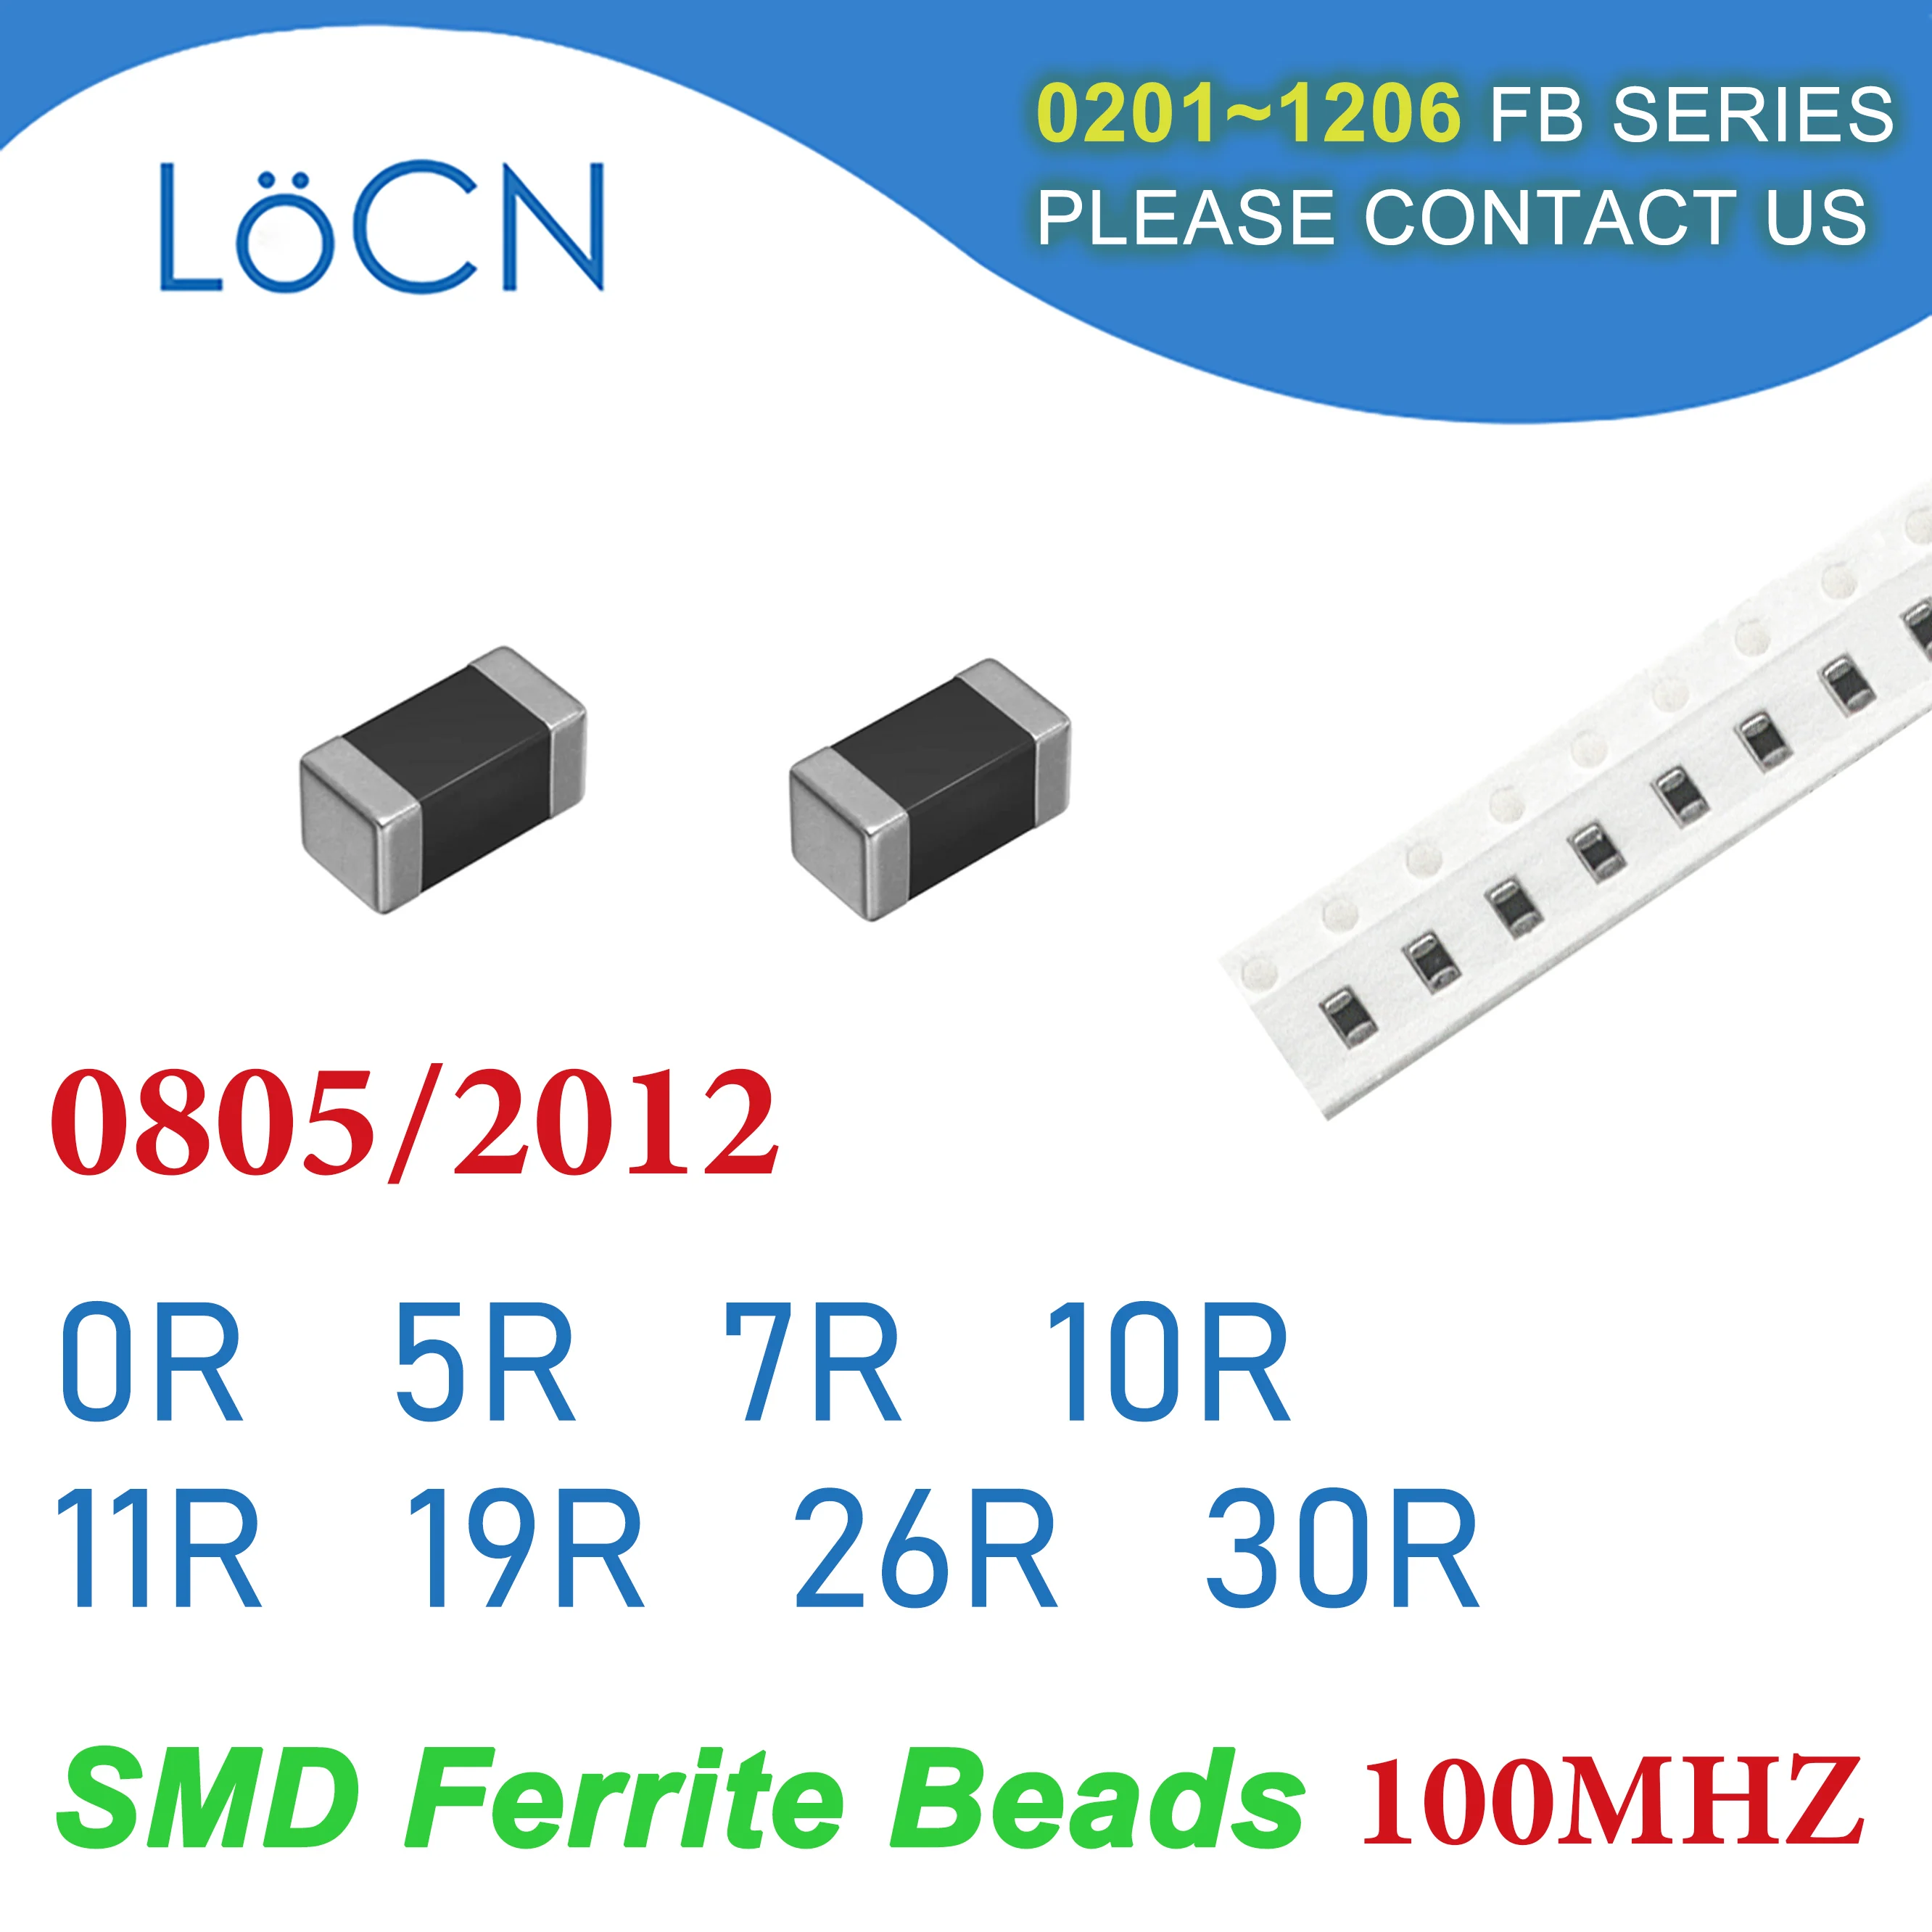 

4000PCS 0805/2012 100MHZ SMD Ferrite Beads 0R 5R 7R 10R 11R 19R 26R 30R Chip Inductor Multilayer 25% High Quality